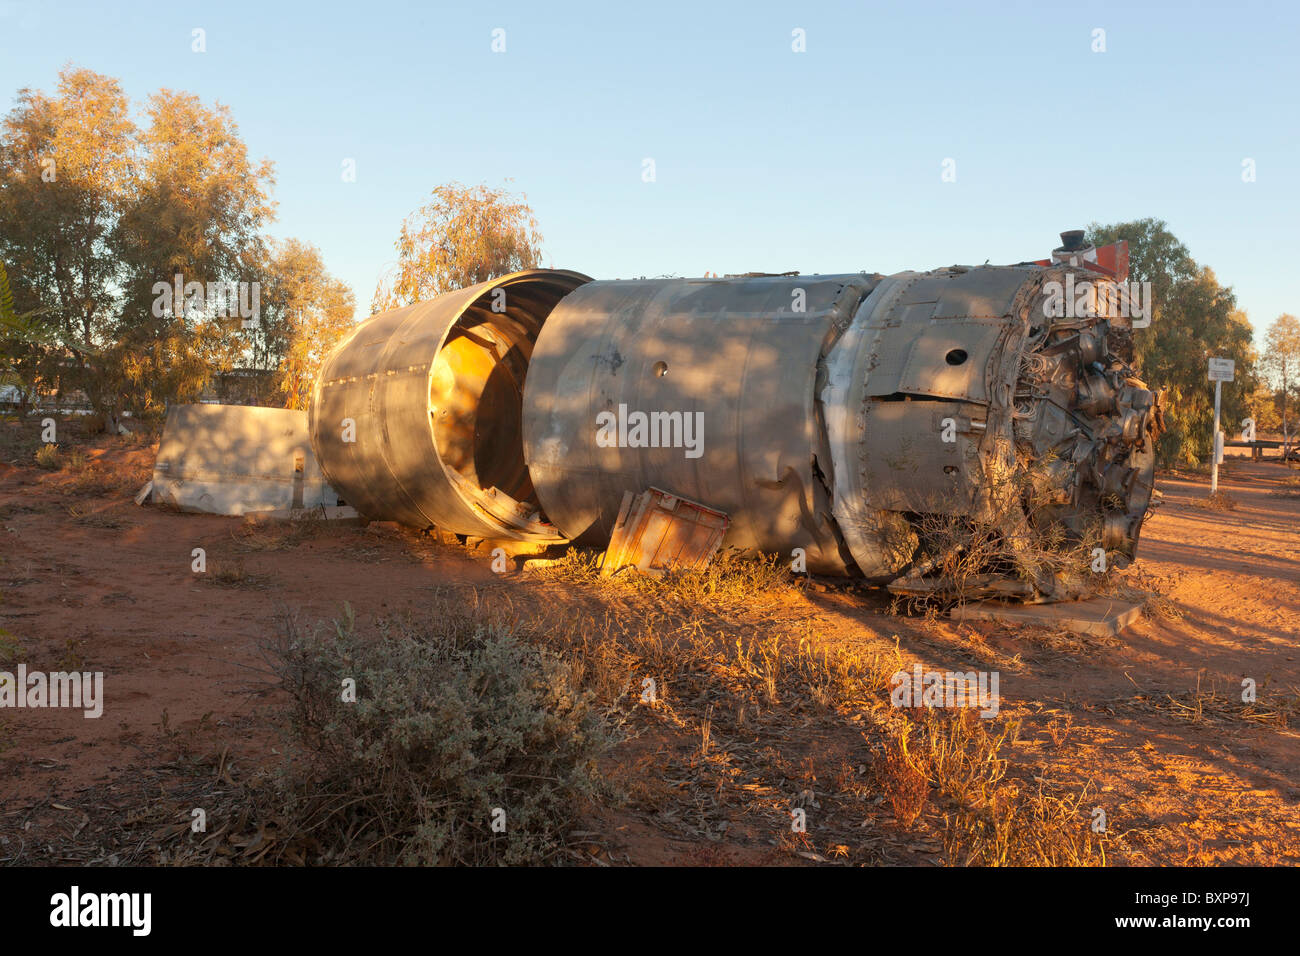 Rocket engine from a British rocket launched from Woomera Rocket Range at William Creek in South Australia's outback Stock Photo